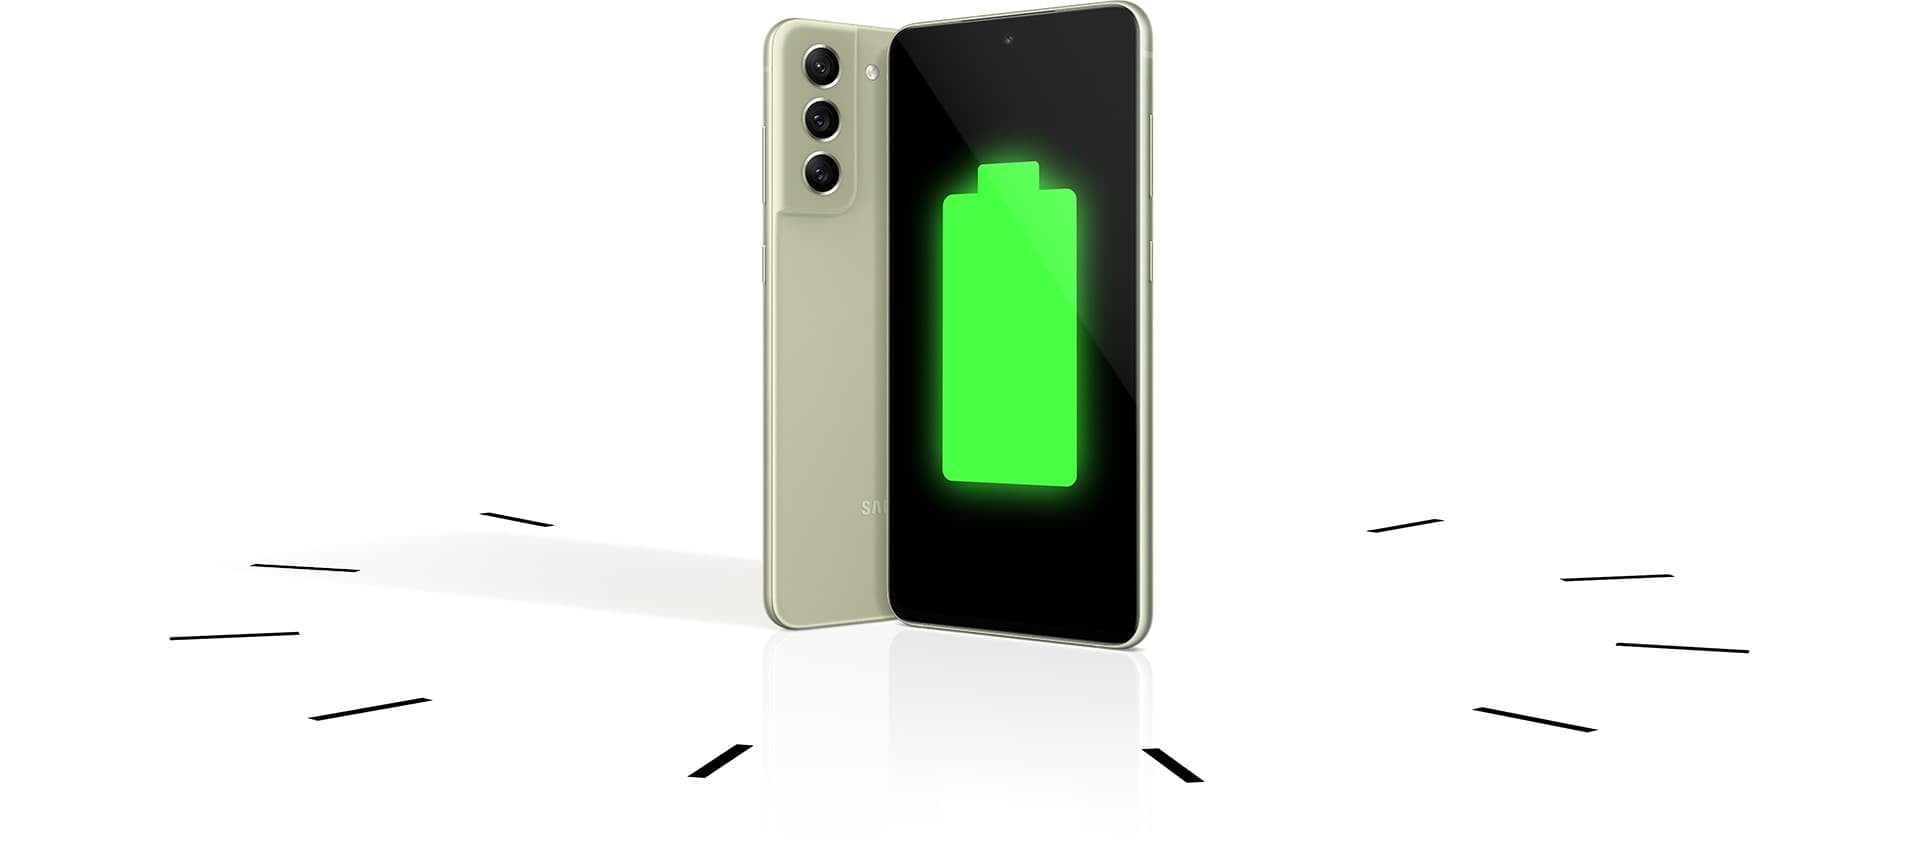 Two Galaxy S21 FE 5G phones seen standing upright, one seen from the rear and one seen from the front with a full battery icon onscreen. The phones stand within a clock to demonstrate the long-lasting battery.